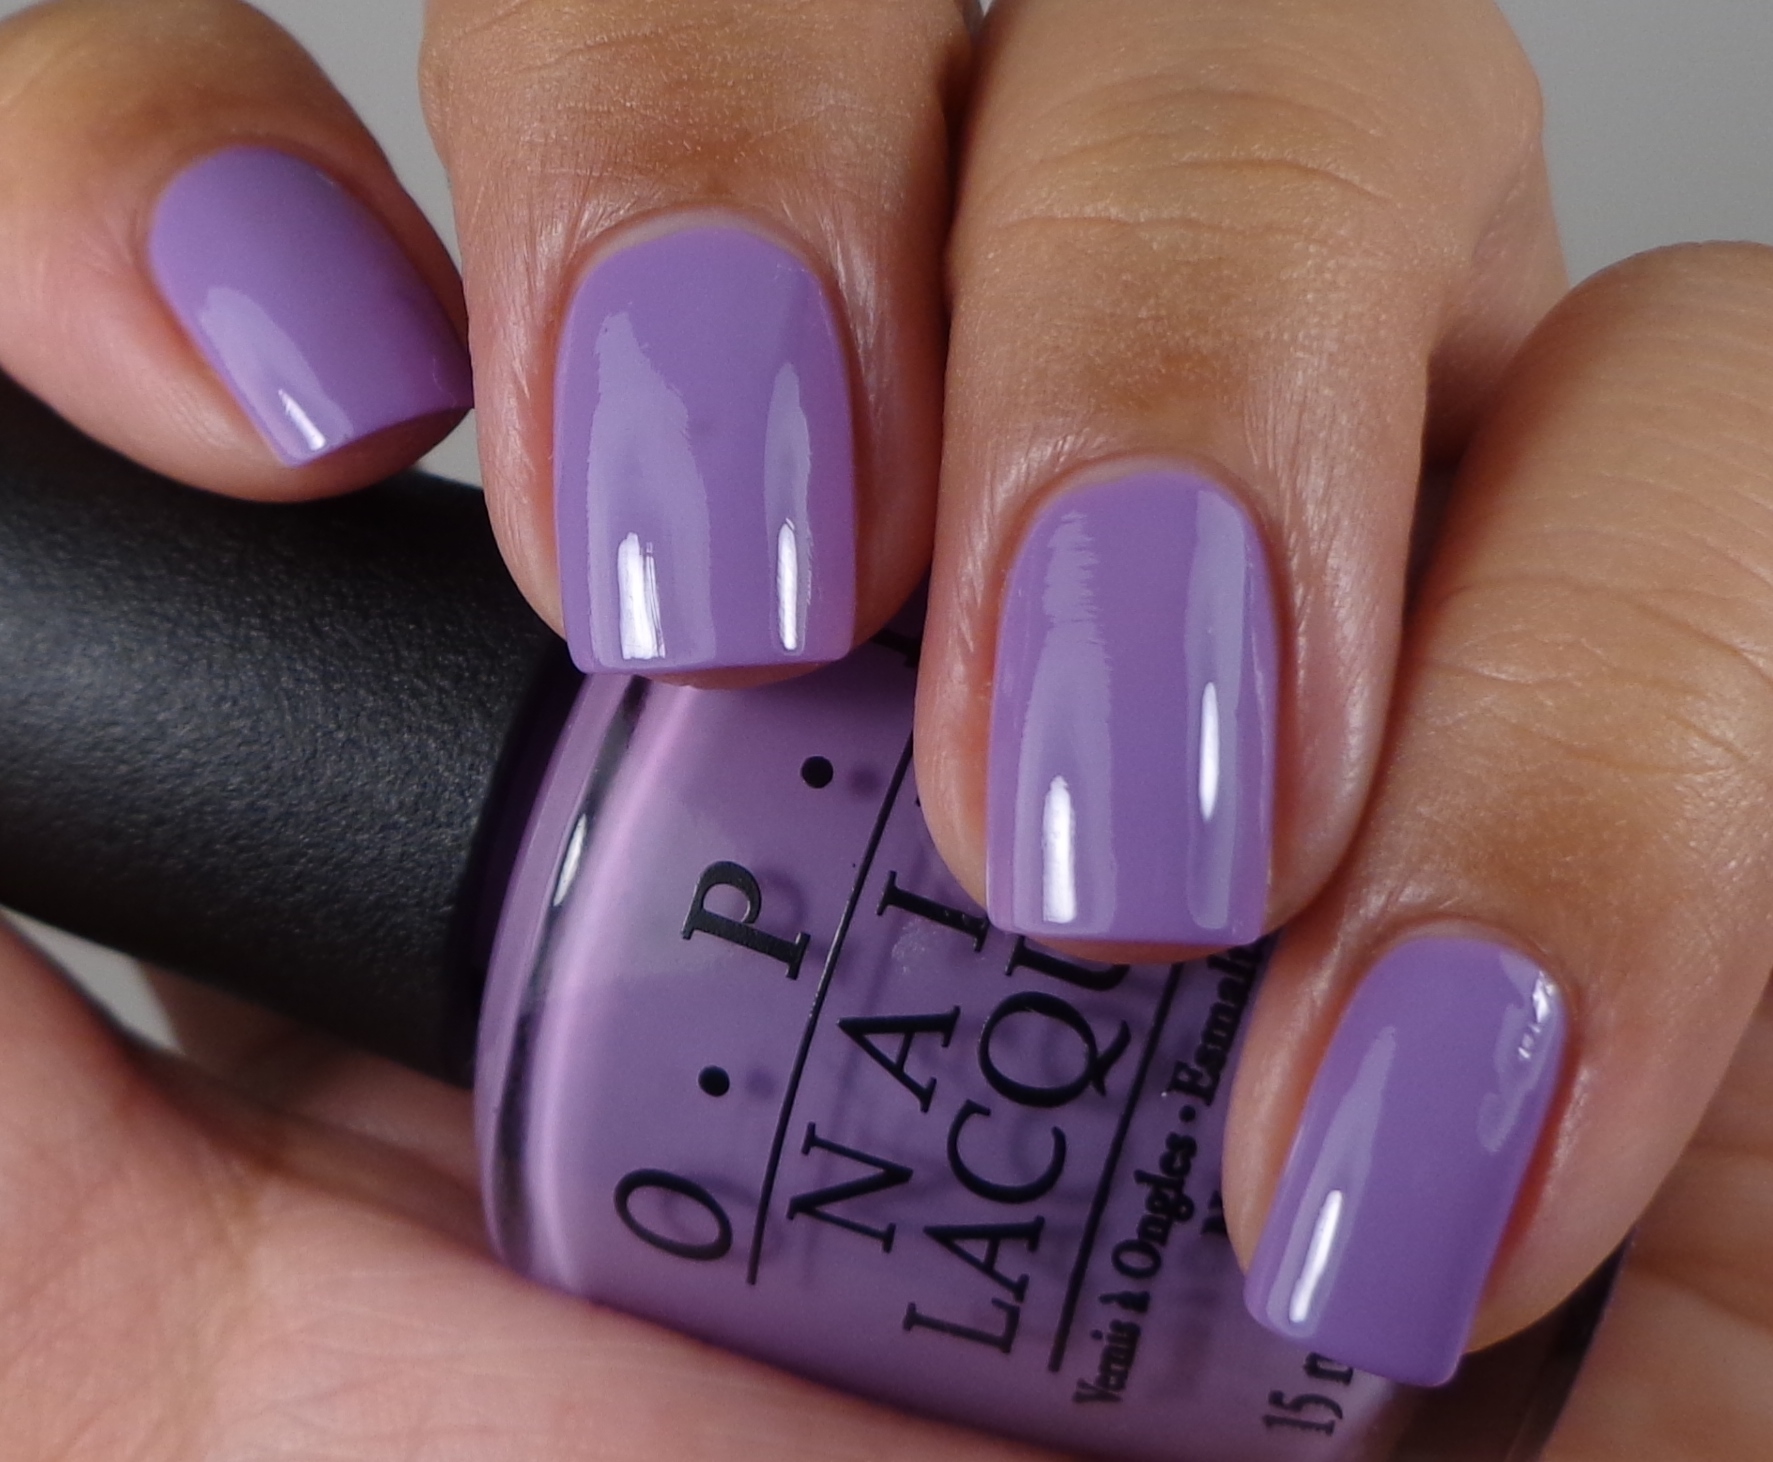 1. OPI Nail Lacquer in "Do You Lilac It?" - wide 5